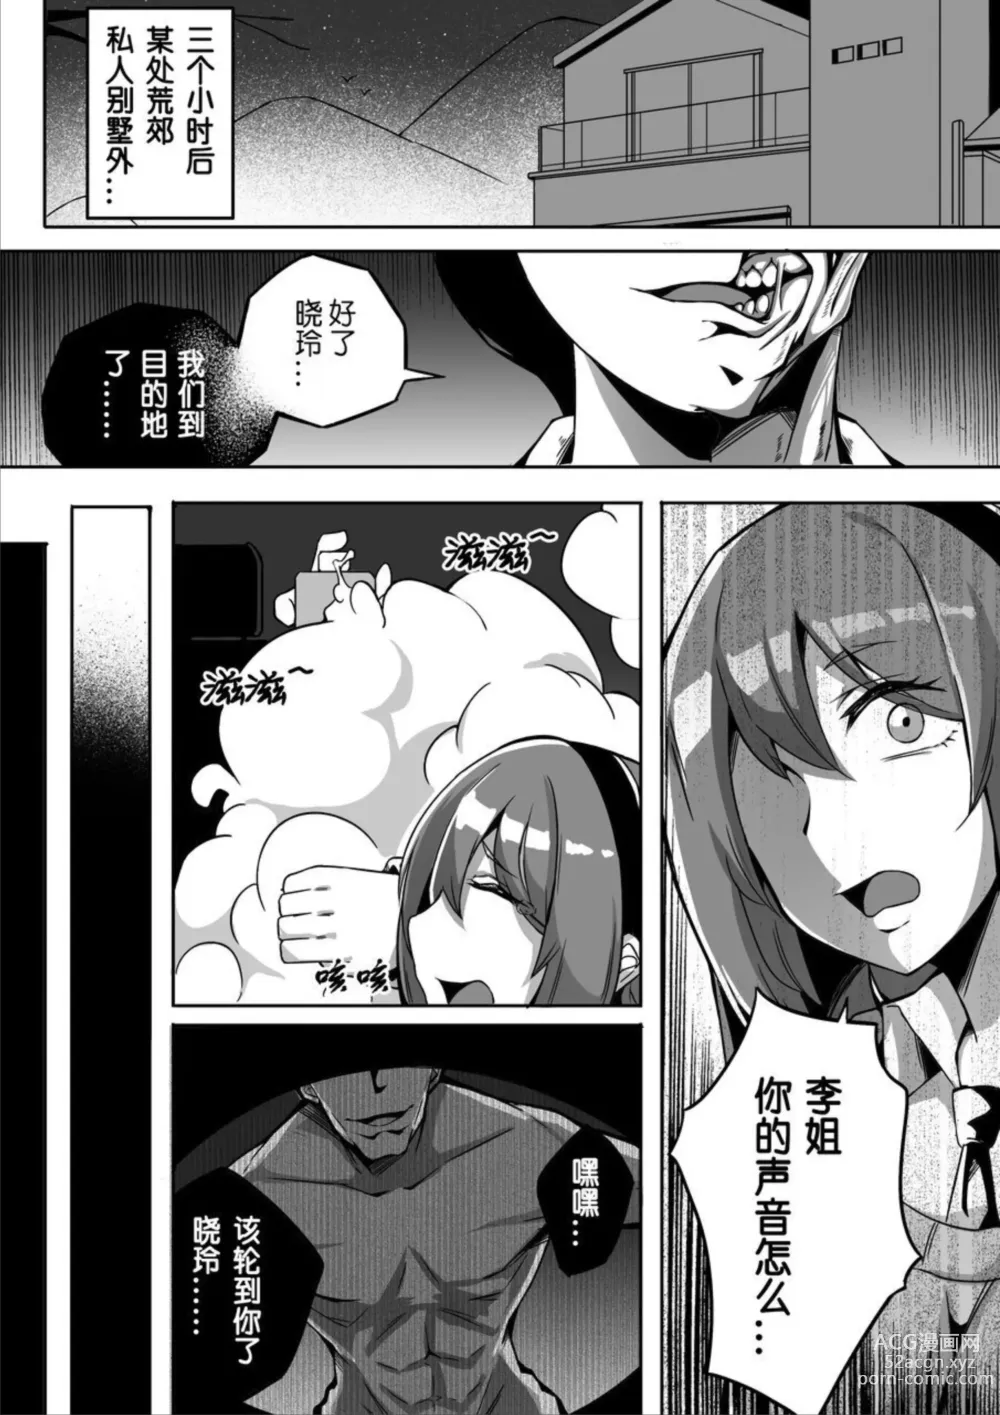 Page 2 of doujinshi 不定形 第2話